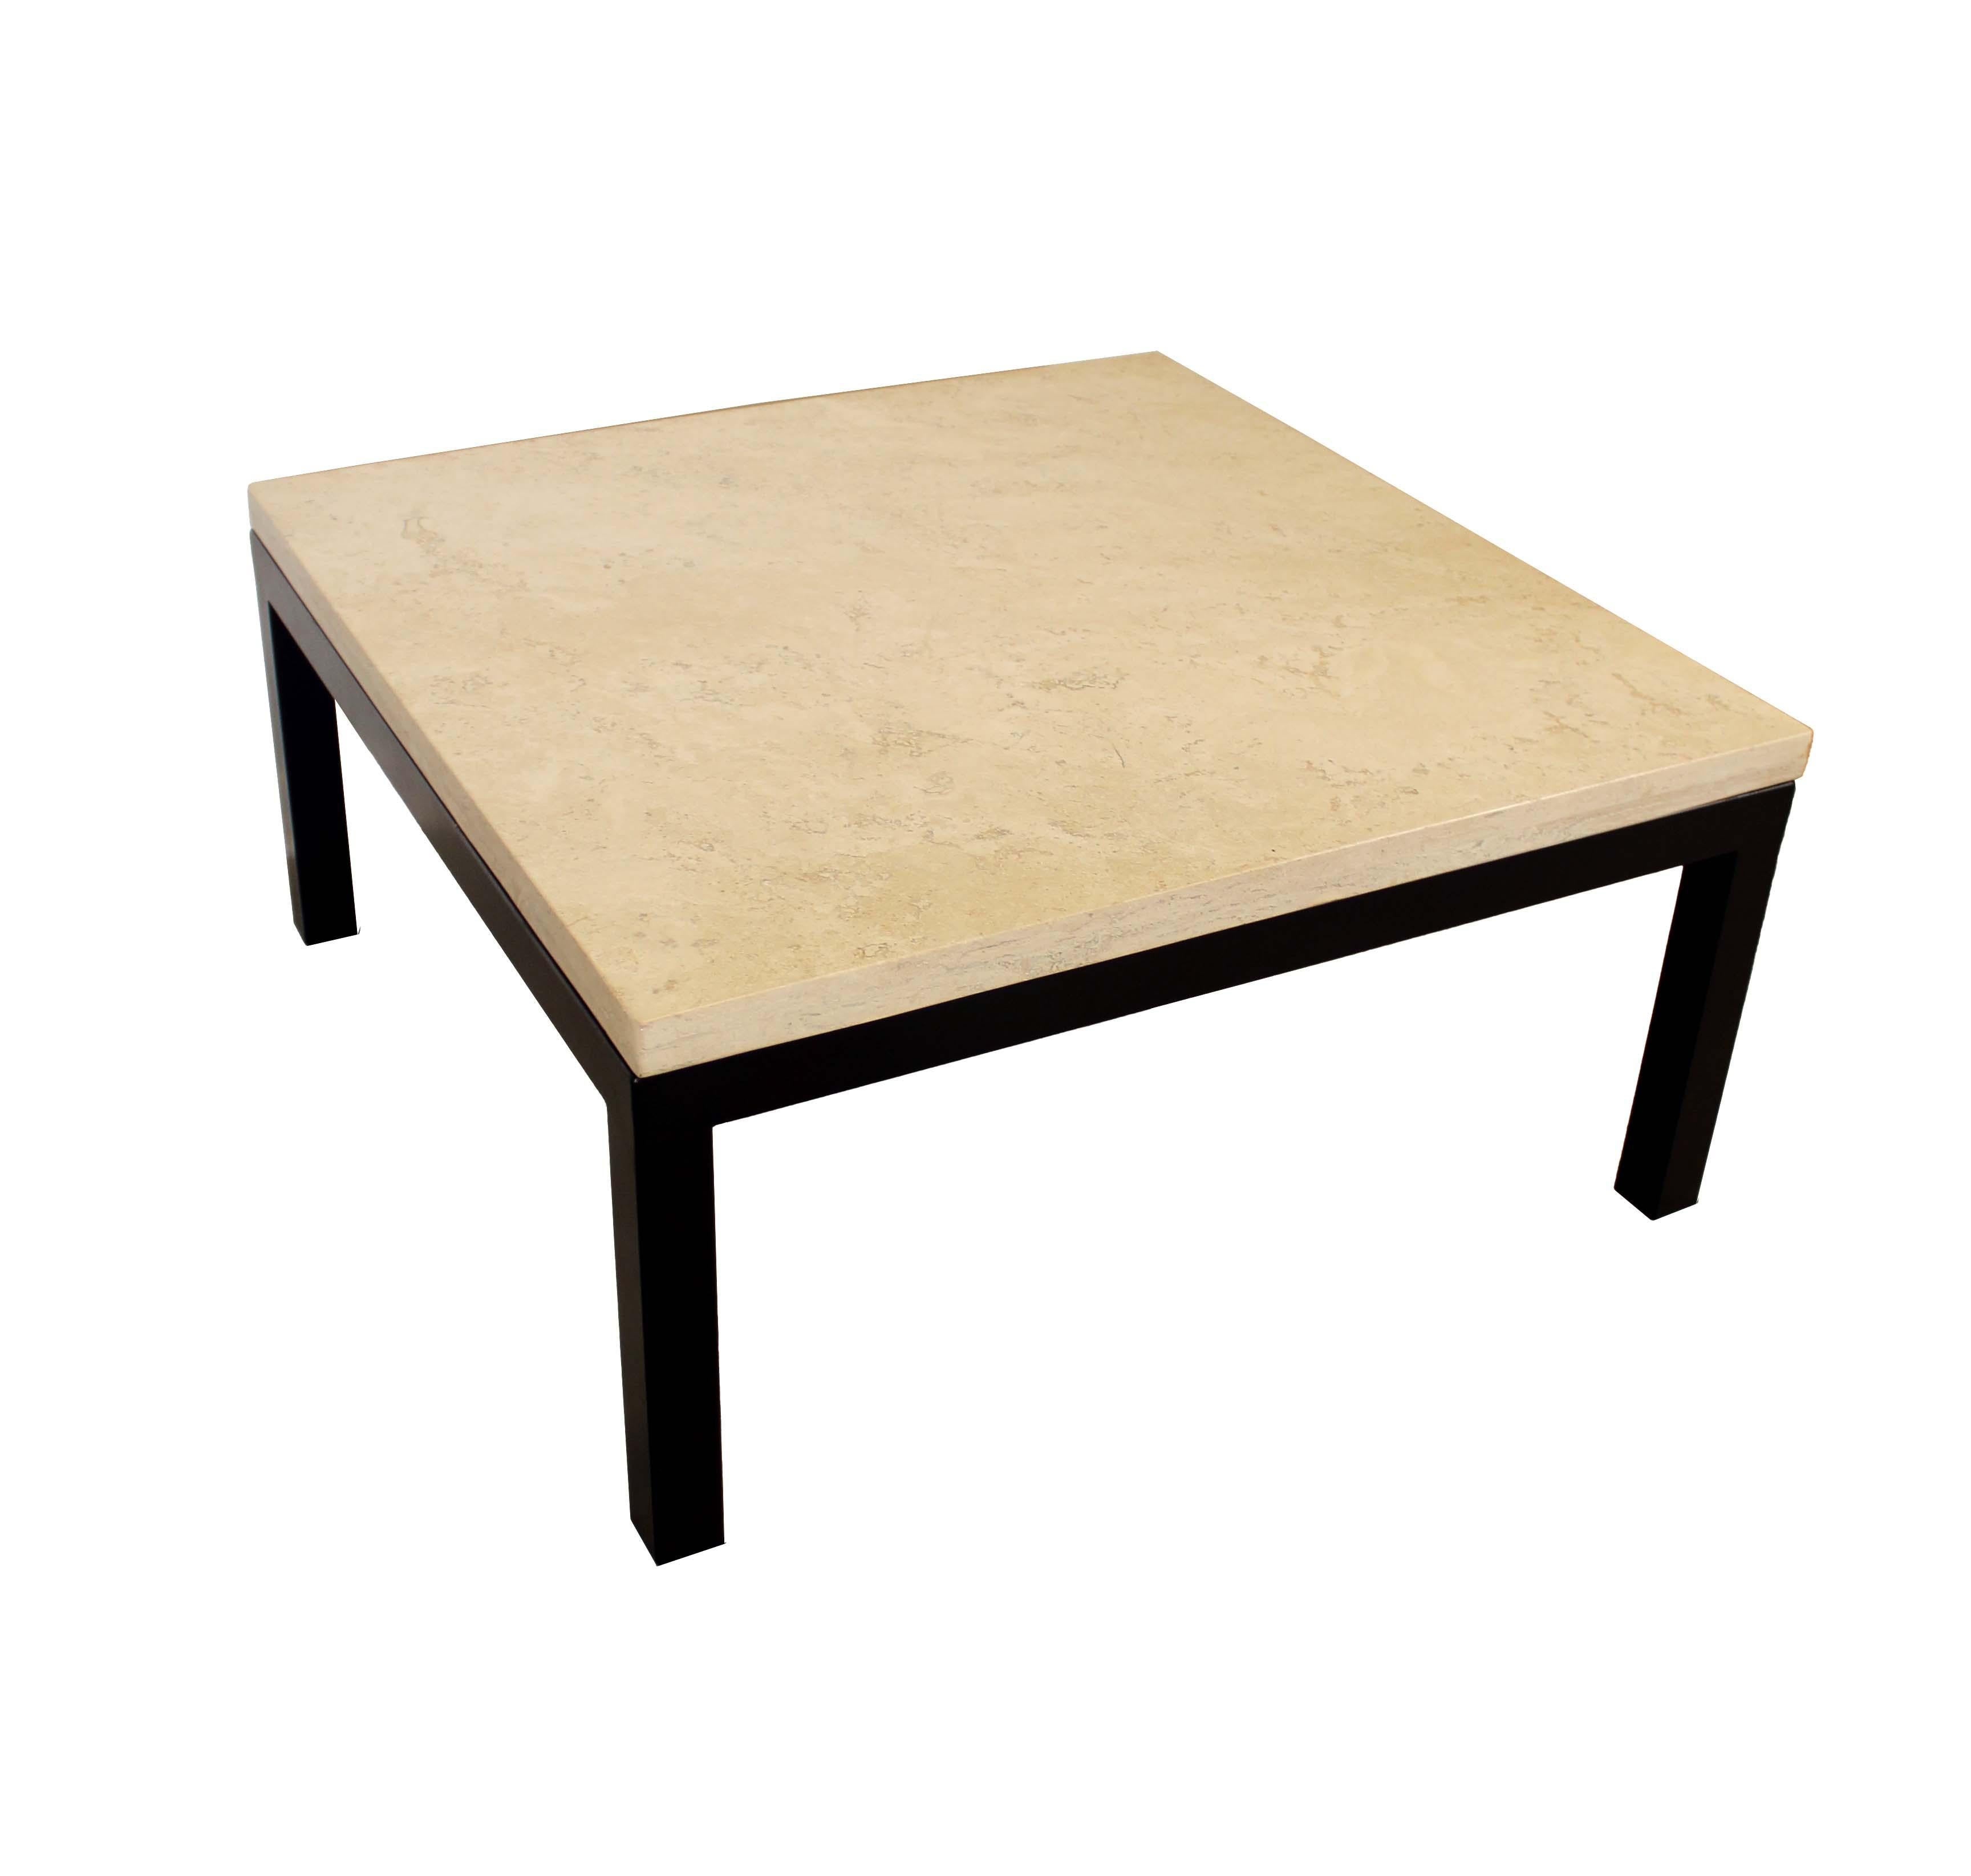 This stunning travertine top coffee table up for consideration. This form of terrestrial limestone is the perfect topper for this style of coffee table. With metal base. The tan and cream color of the travertine makes this piece a perfect fit in any